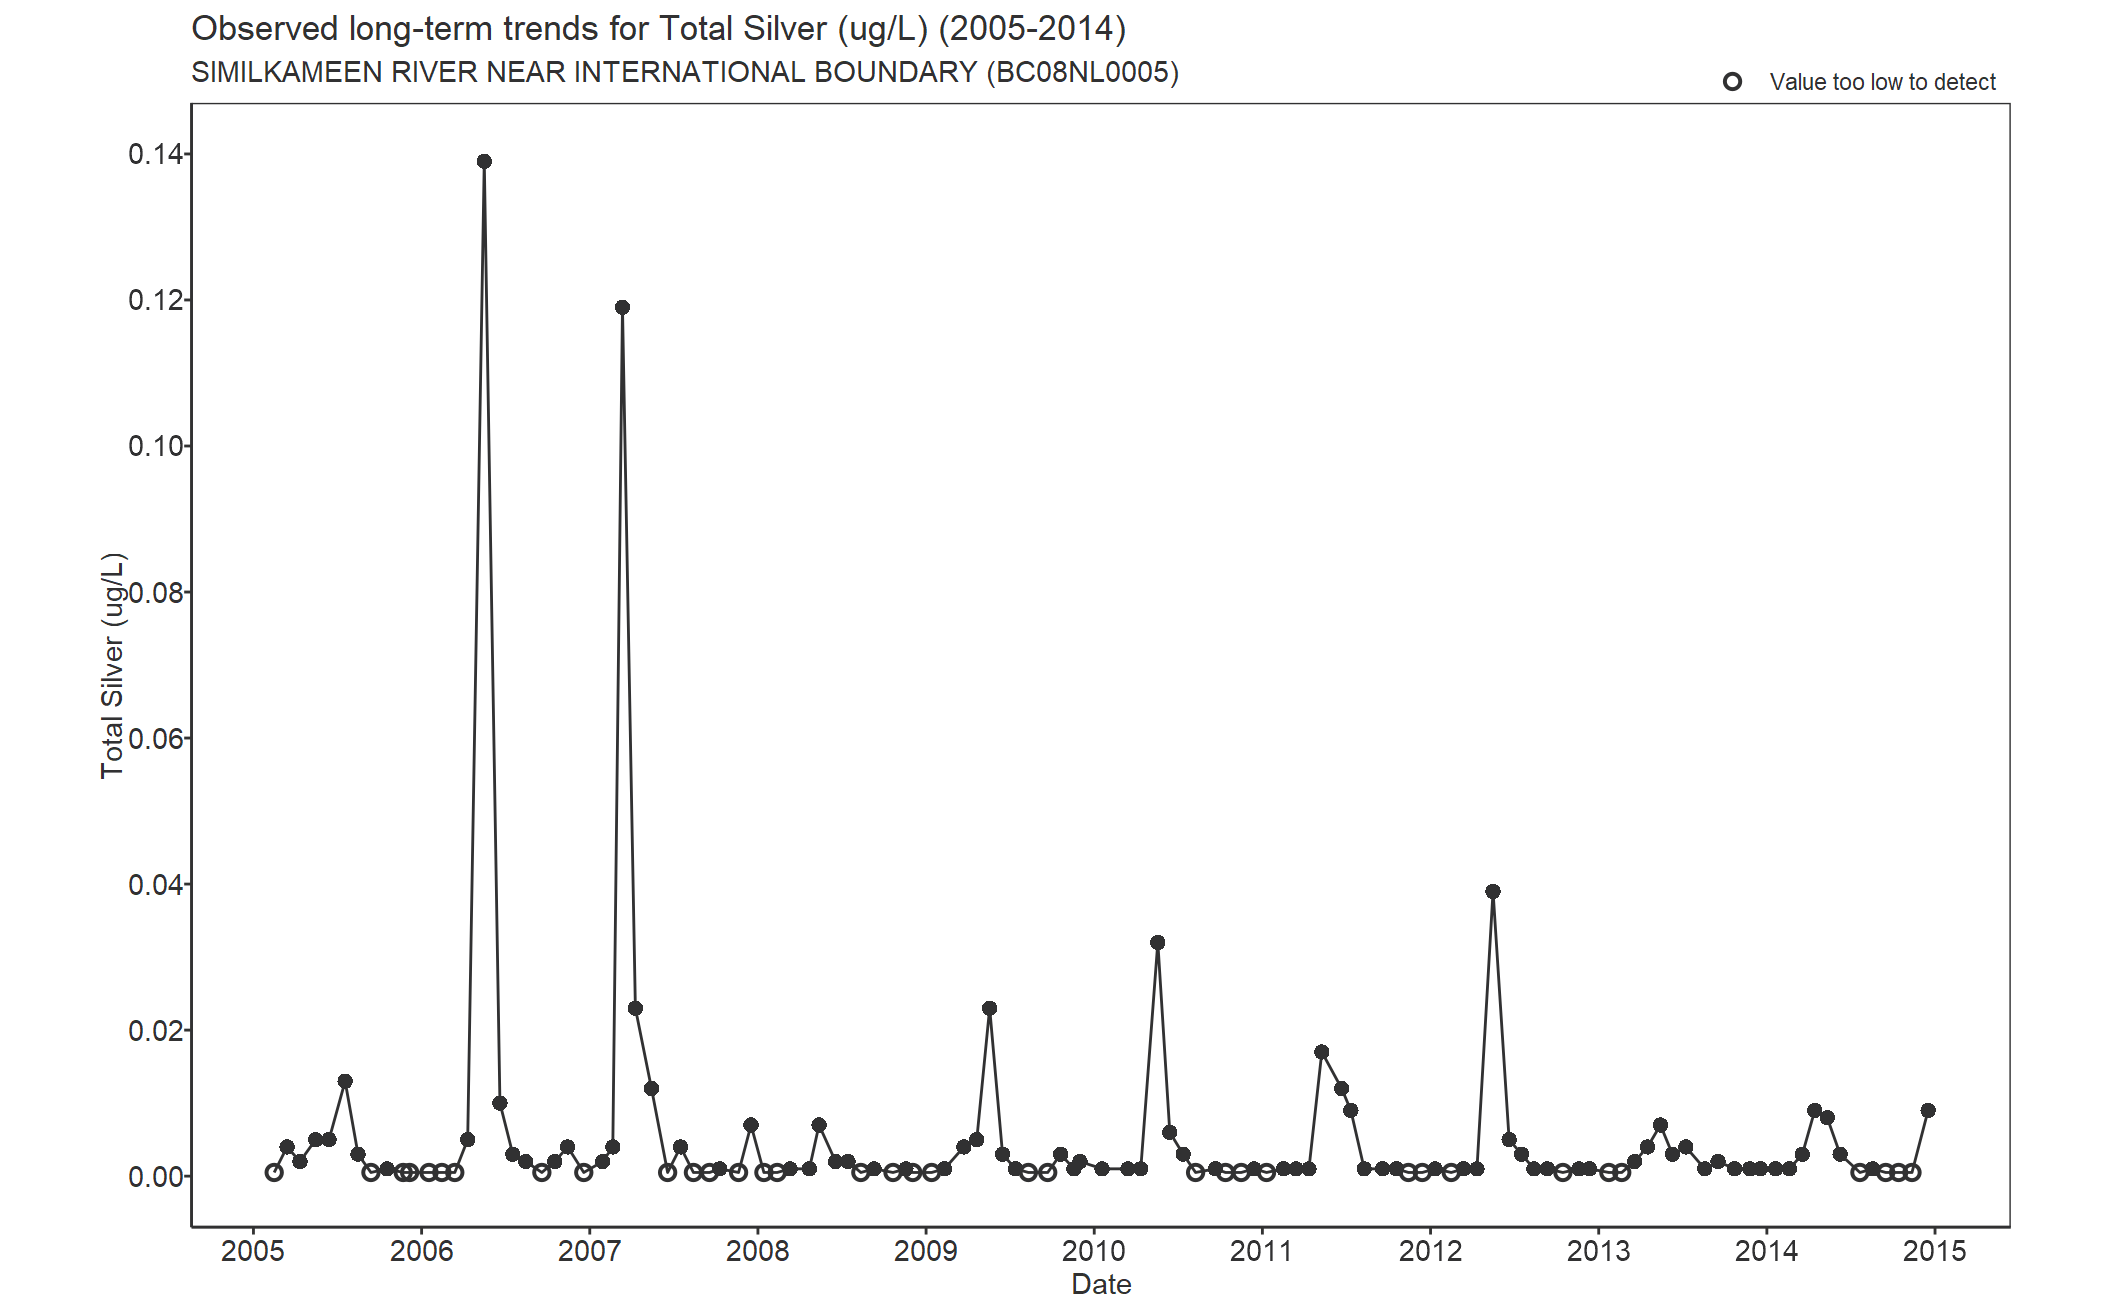 Observed long-term trends for Total Silver (2005-2014)